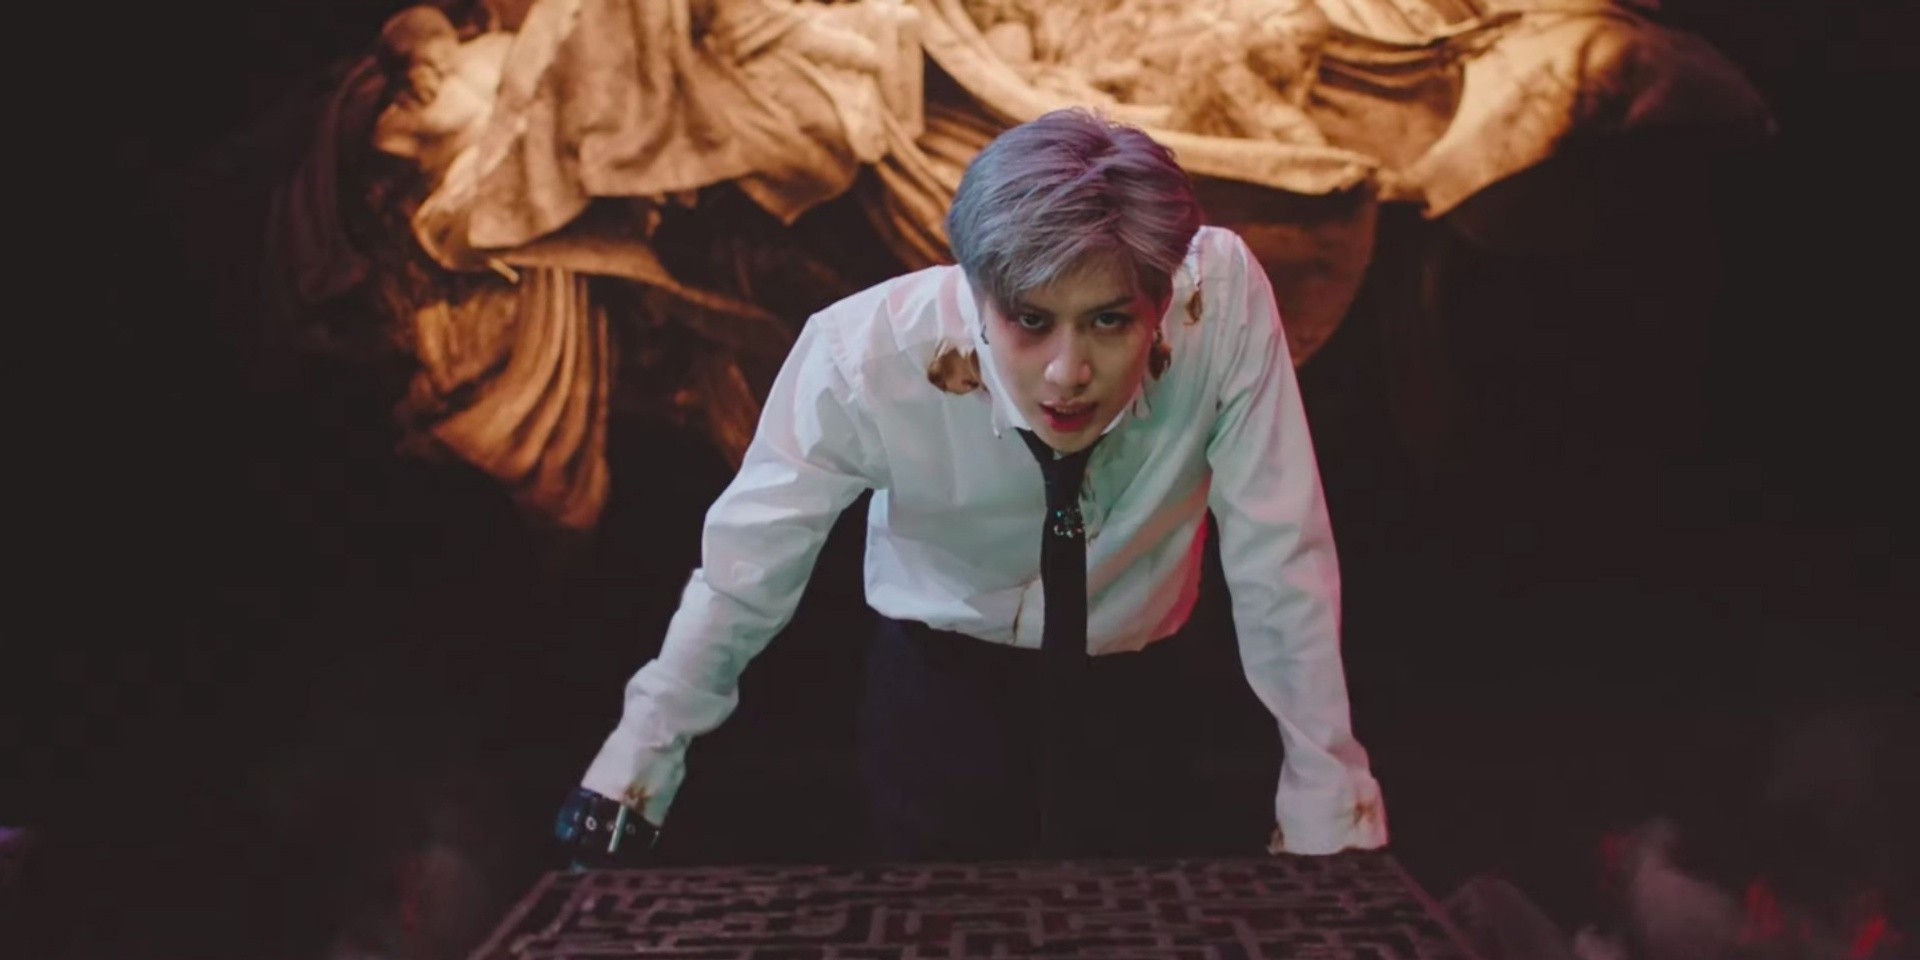 Taemin of SHINee drops new album Never Gonna Dance Again: Act 1 and 'Criminal' music video – watch